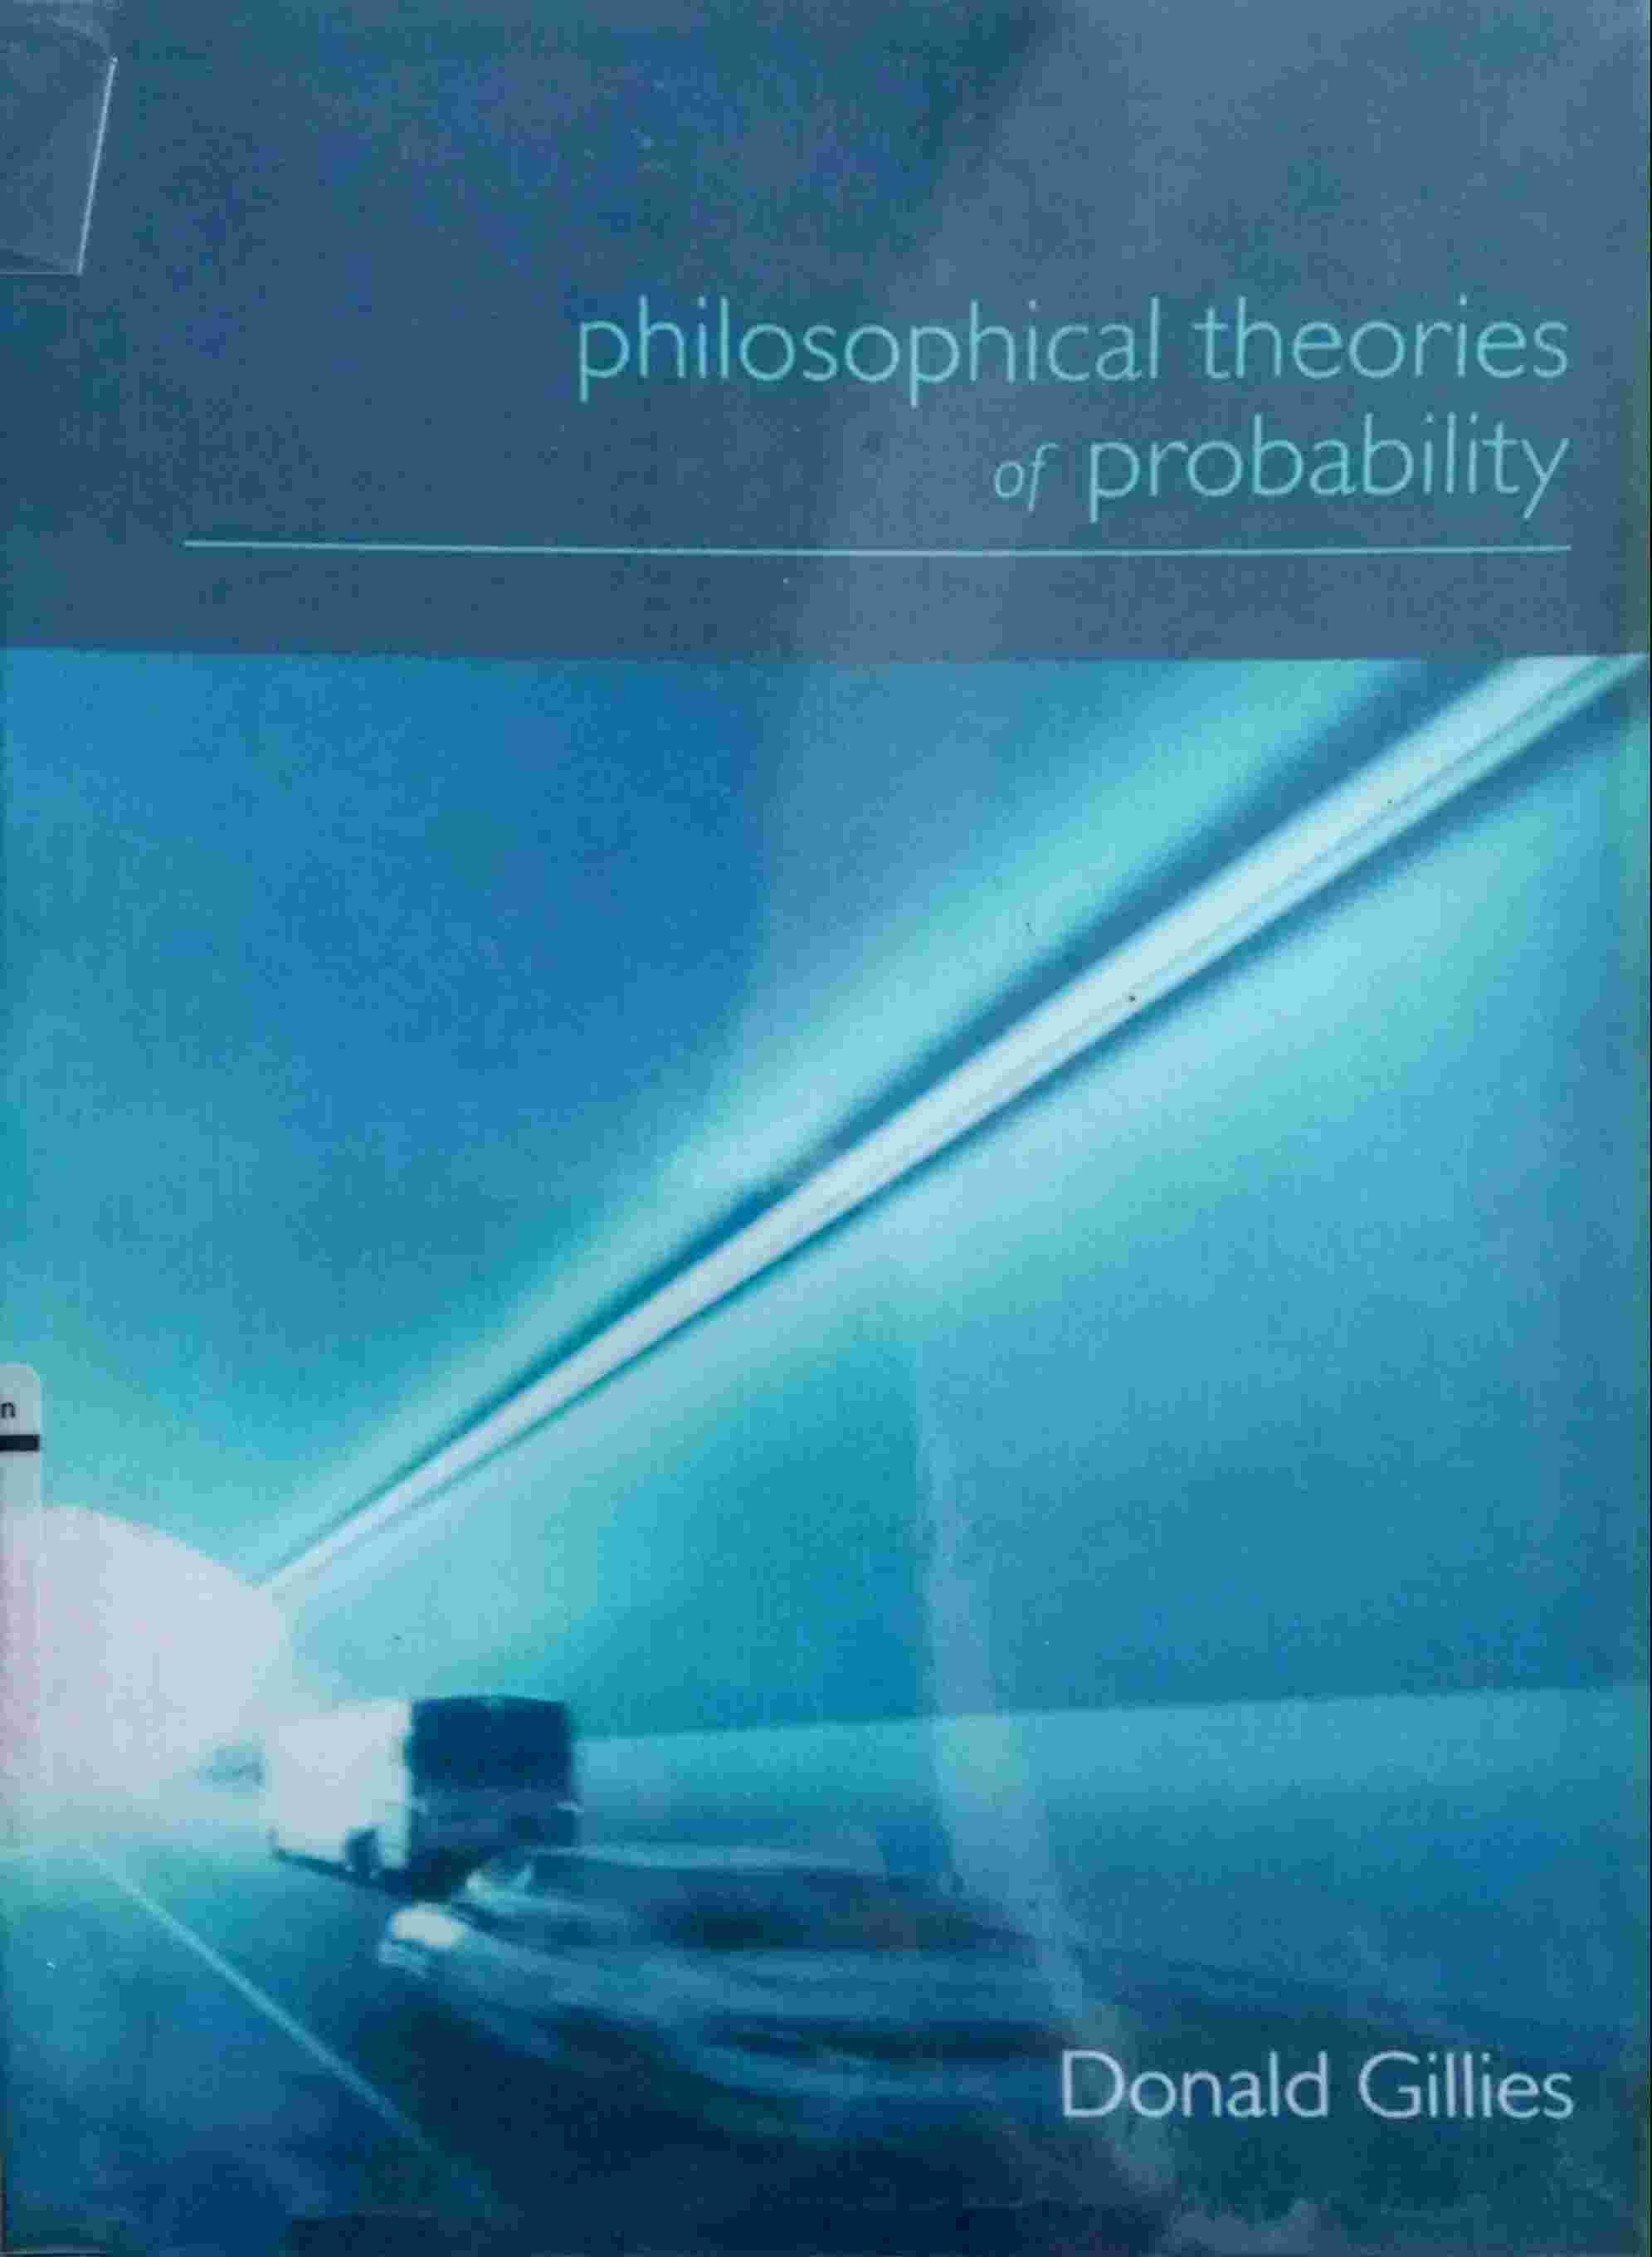 PHILOSOPHICAL THEORIES OF PROBABILITY